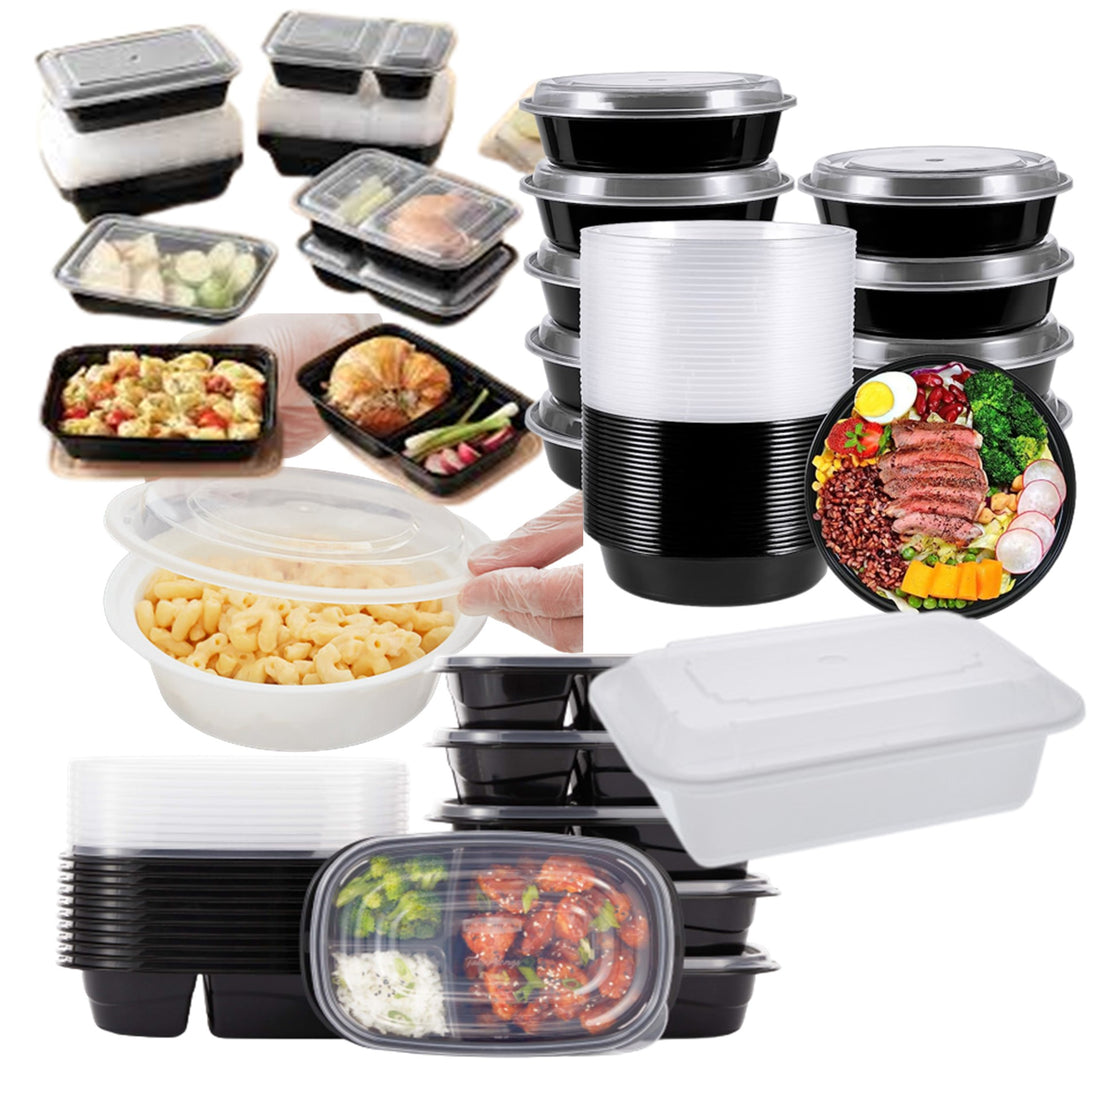 Convenience and Practicality: Disposable Microwavable Meal Prep Containers with Clear Lids